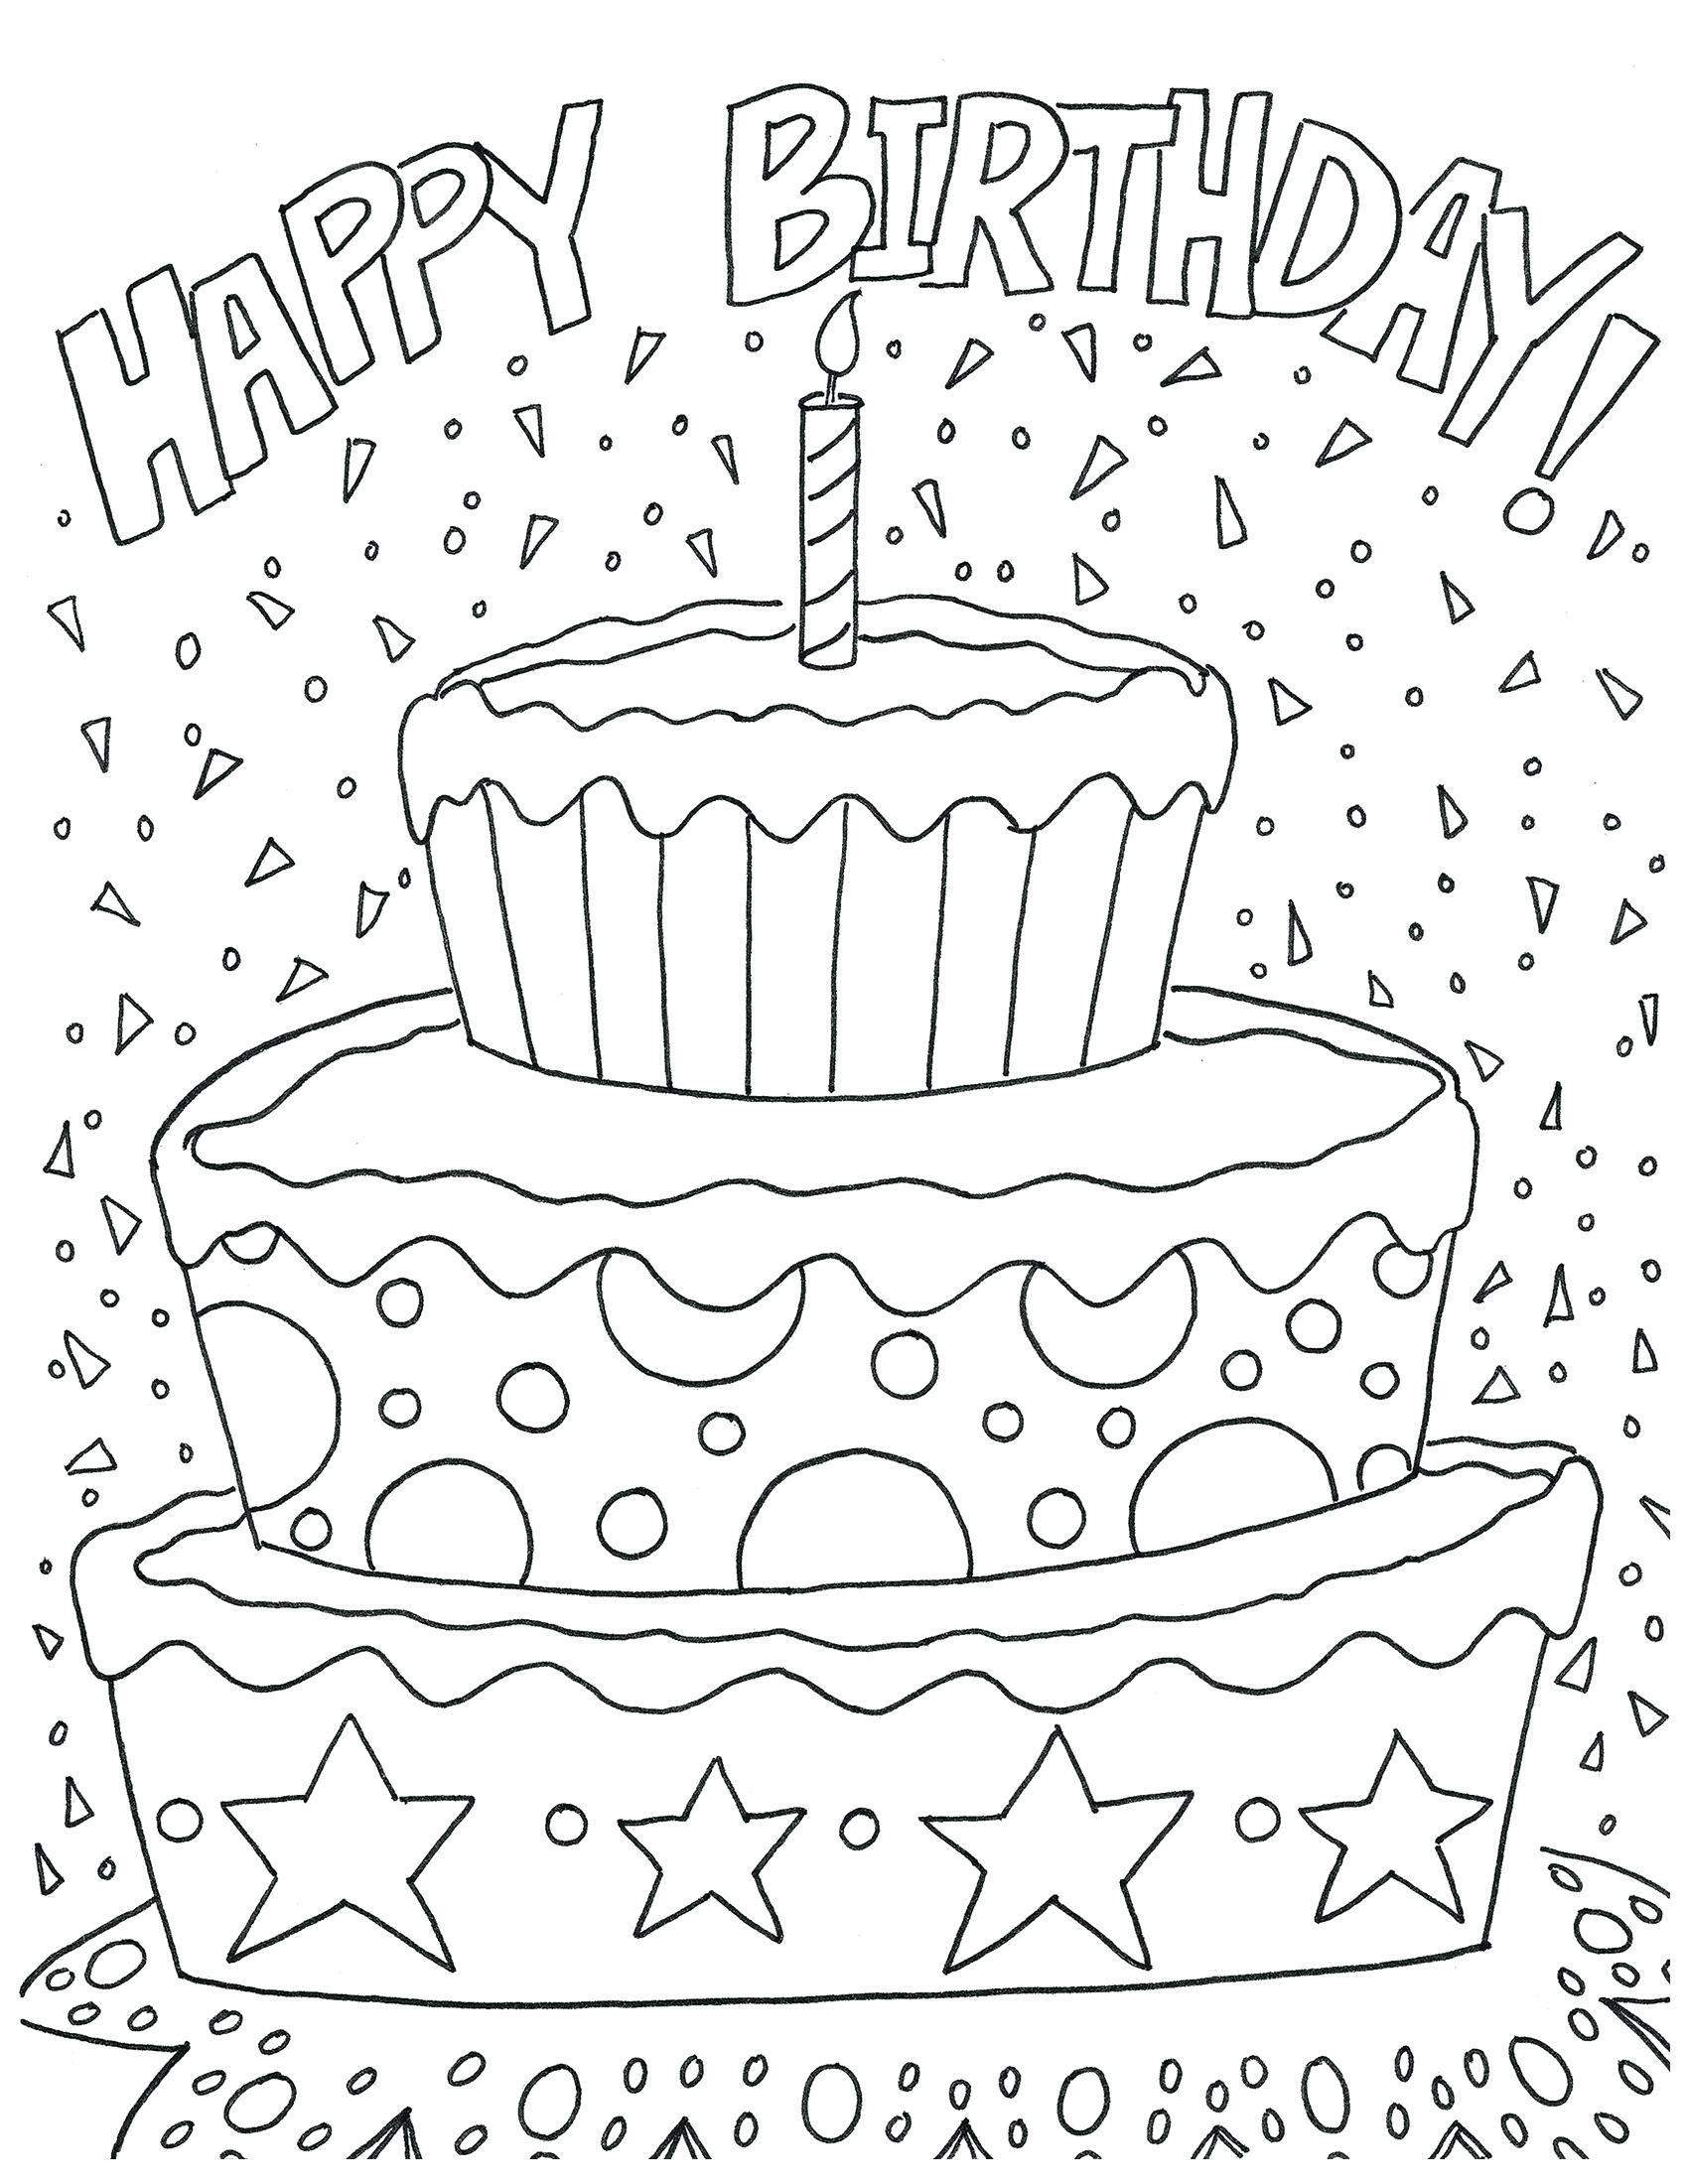 Birthday Coloring Pages For Adults At GetColorings Free Printable 